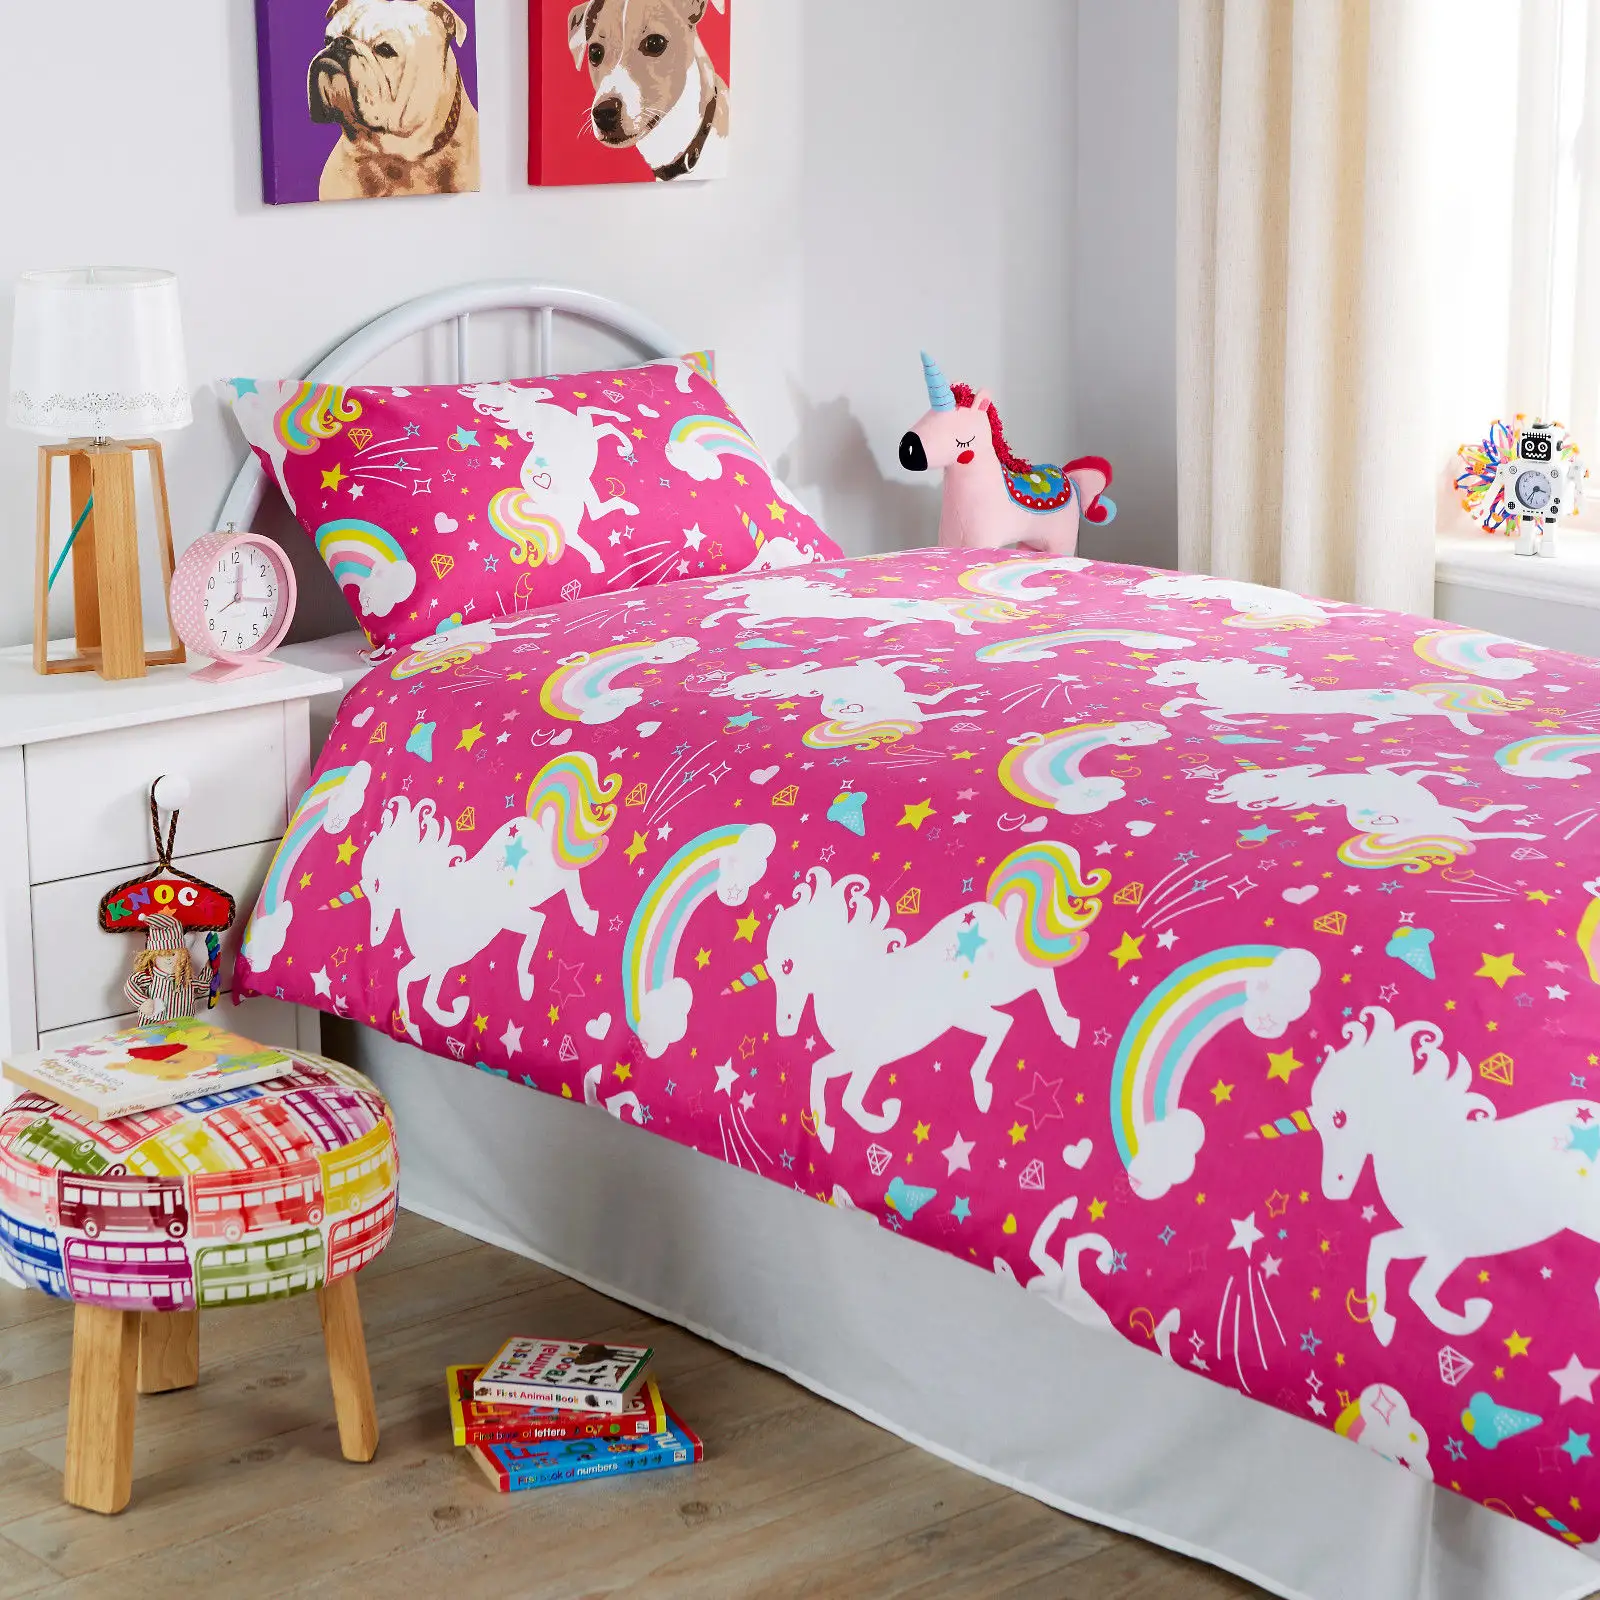 Digital Printed Girls Quilt Cover Christmas Gifts Cartoon Unicorn Bedding Set Egyptian Cotton Queen Size Duvet Cover Set for Kid